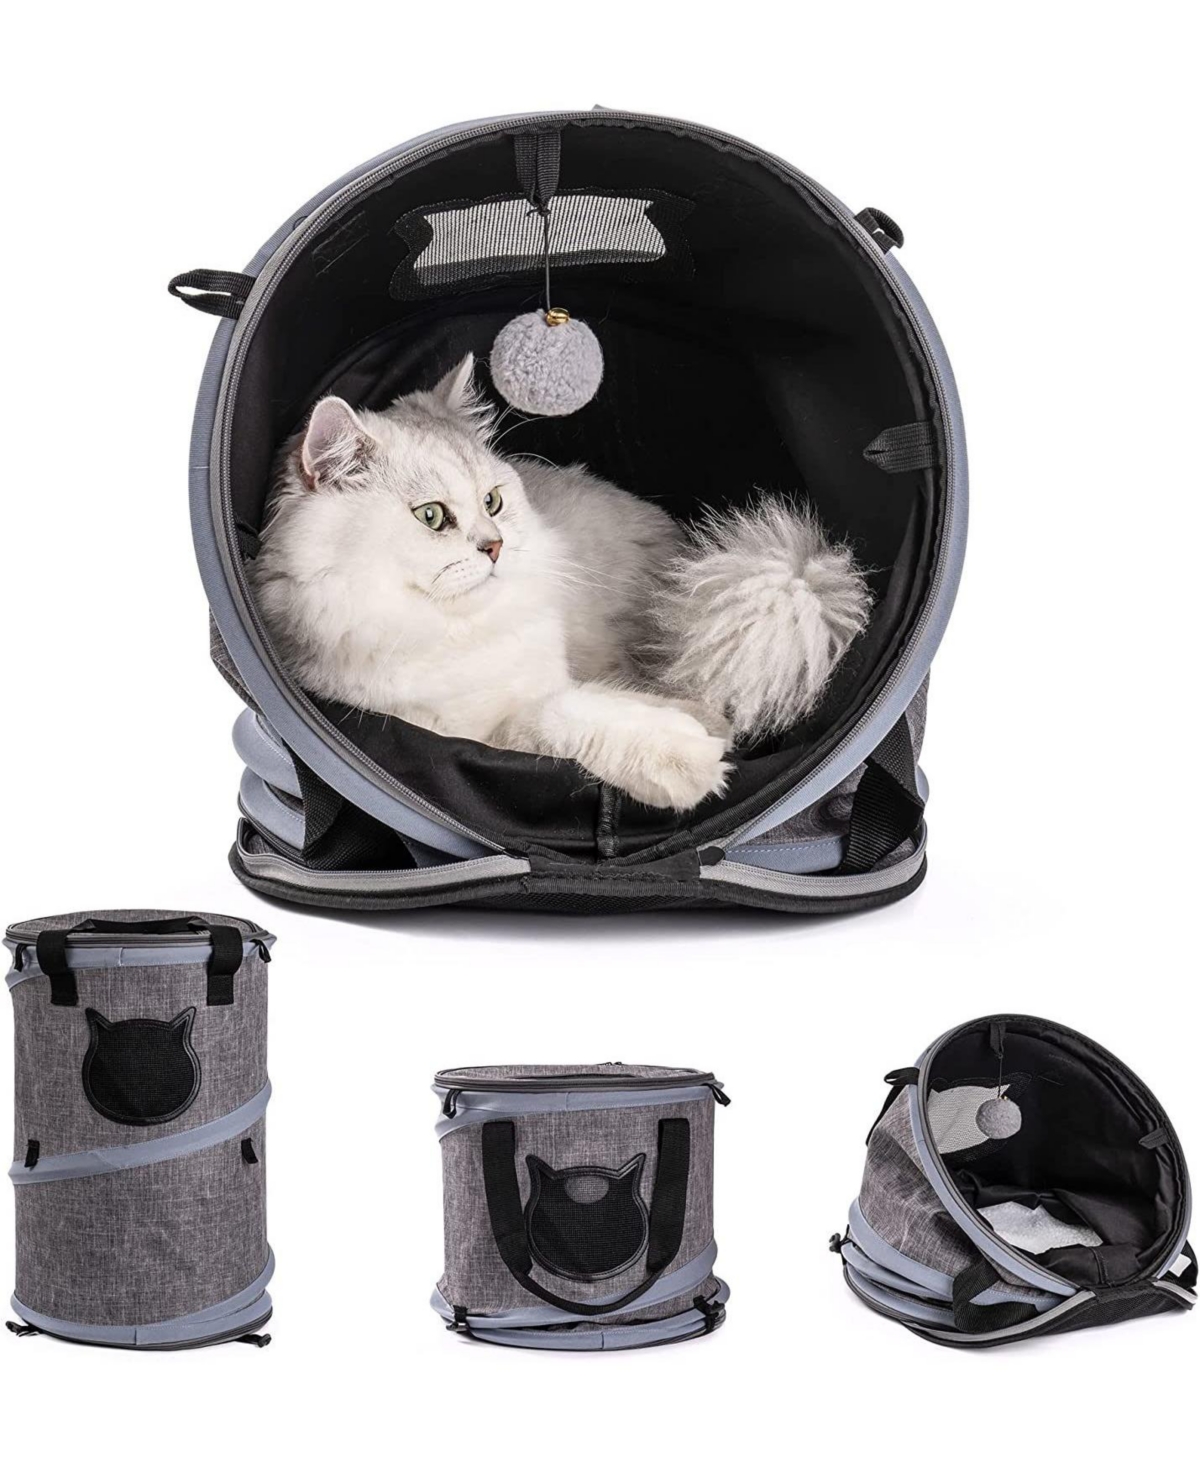 3 in 1 Cat Bed - Foldable Tunnel Pet Travel Carrier Bag - Grey